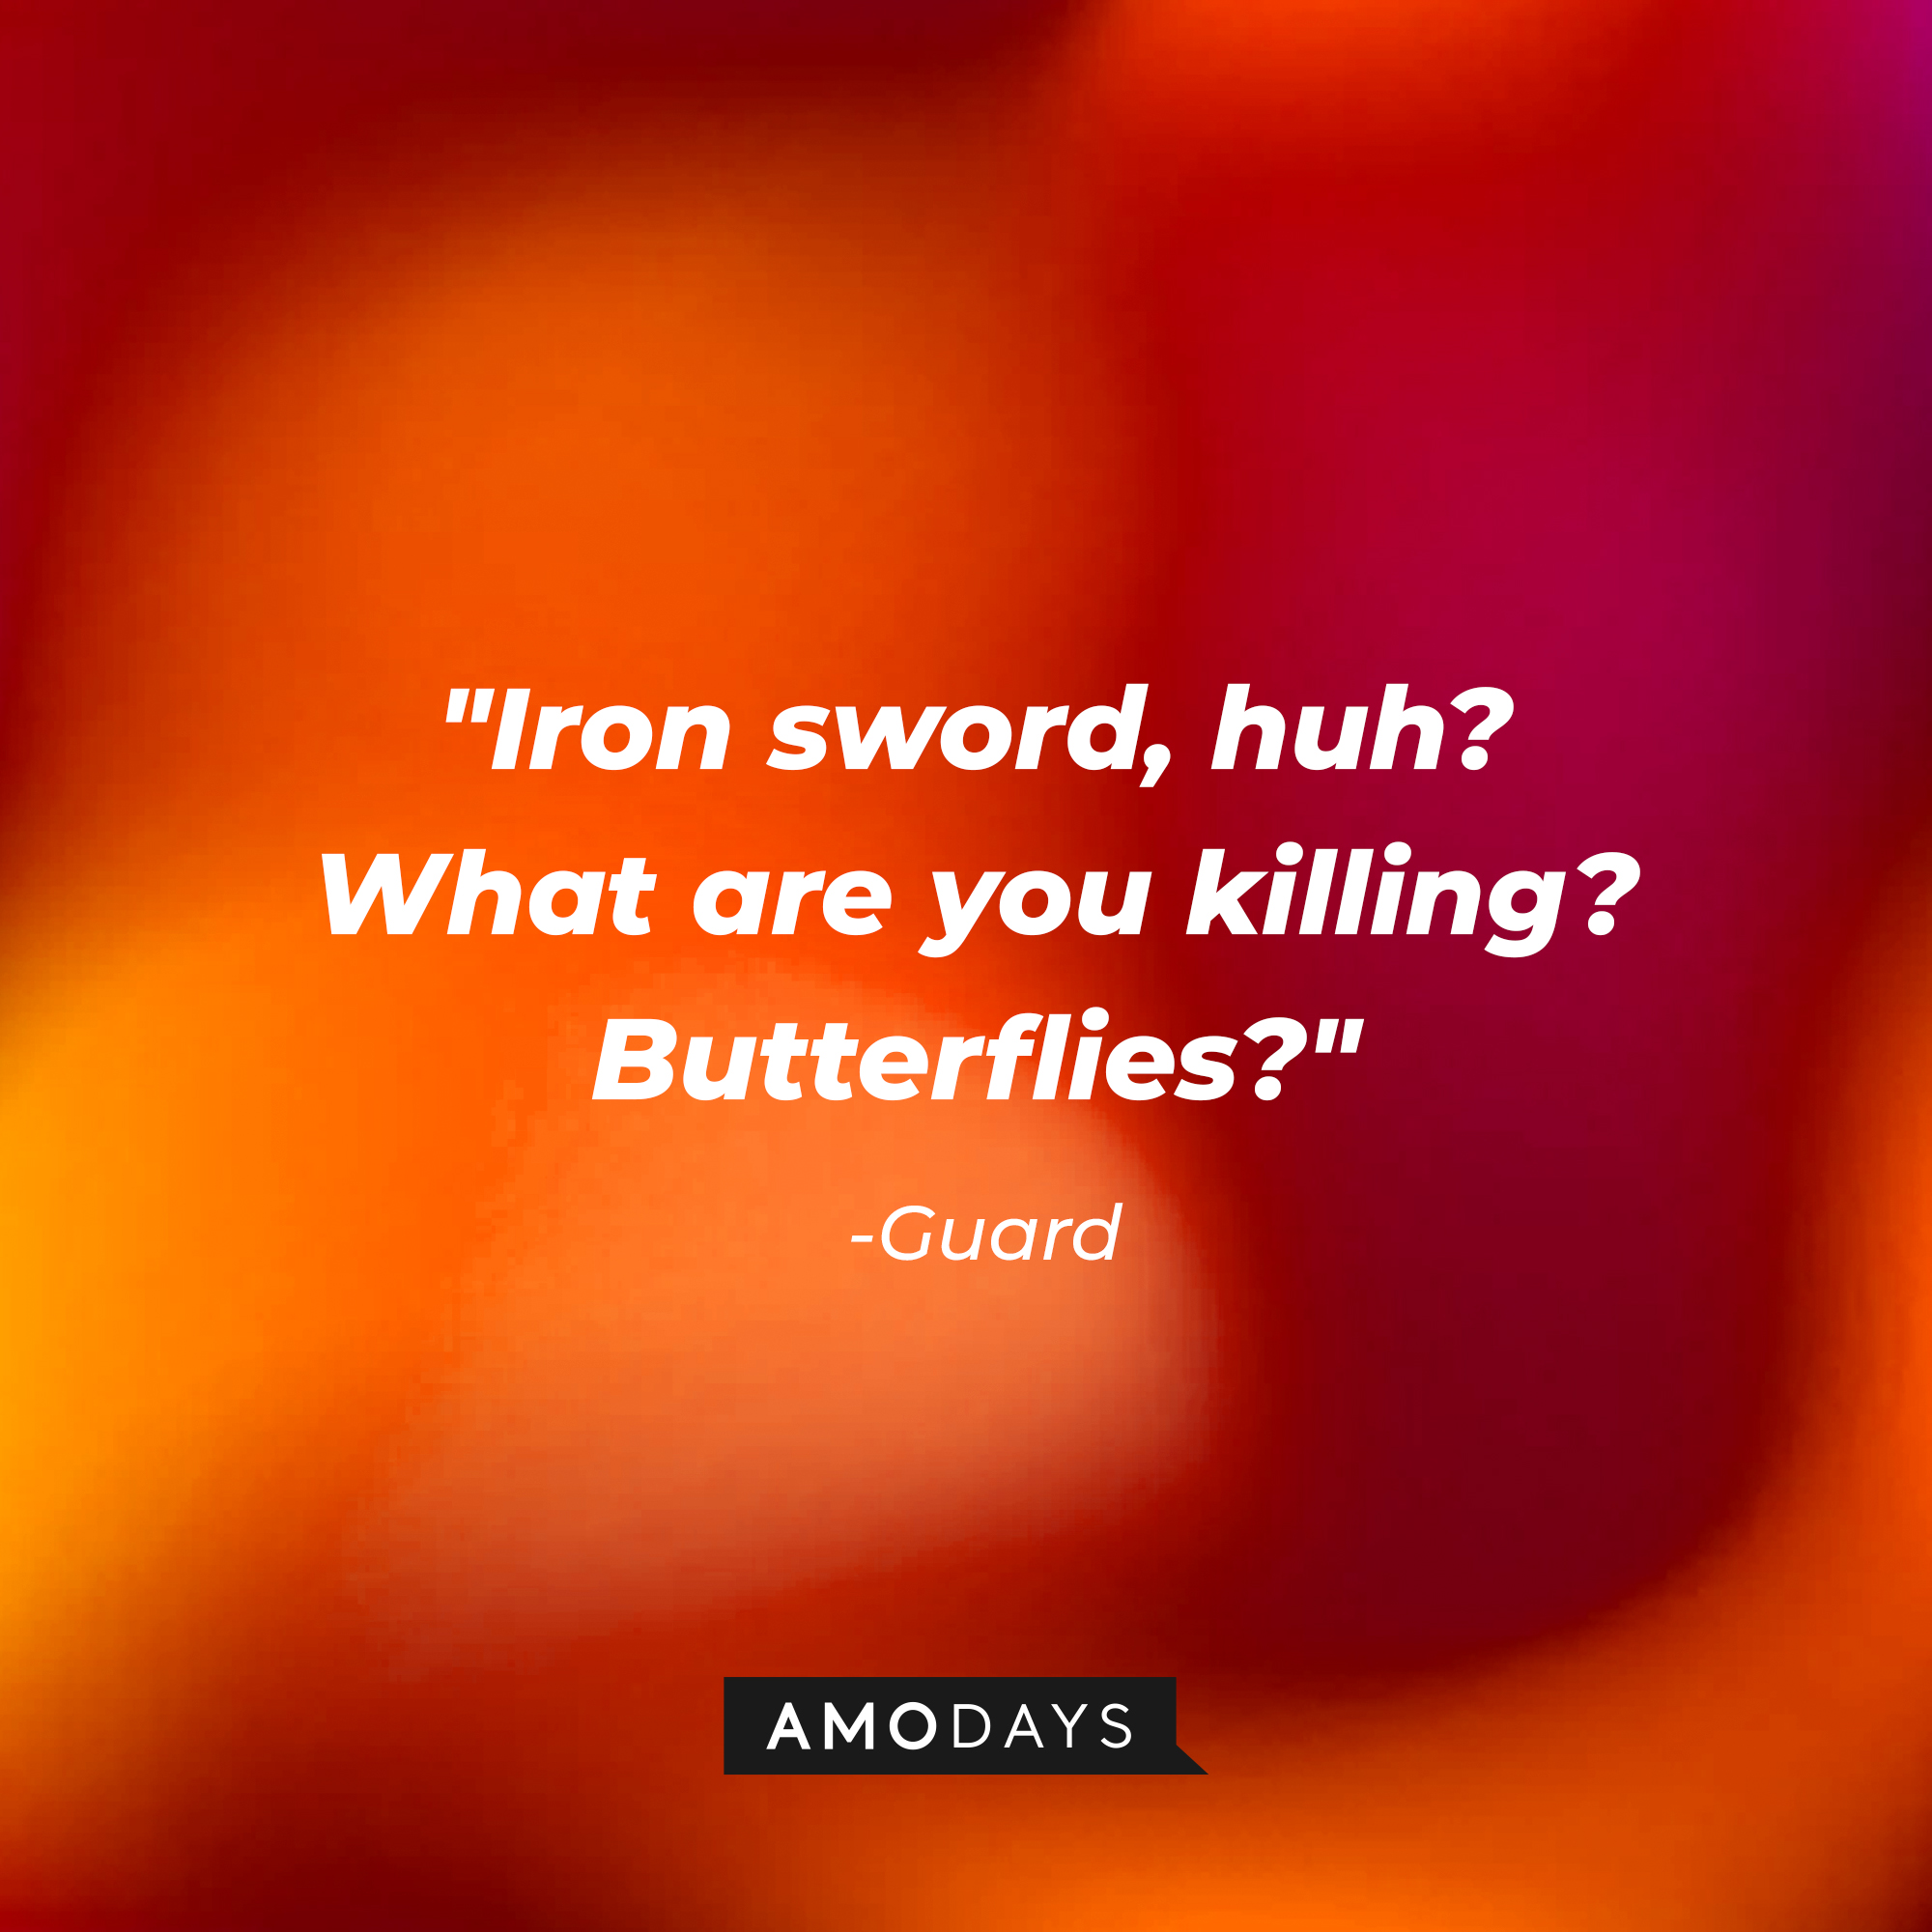 Guard's quote: "Iron sword, huh? What are you killing? Butterflies?" | Source: Amodays